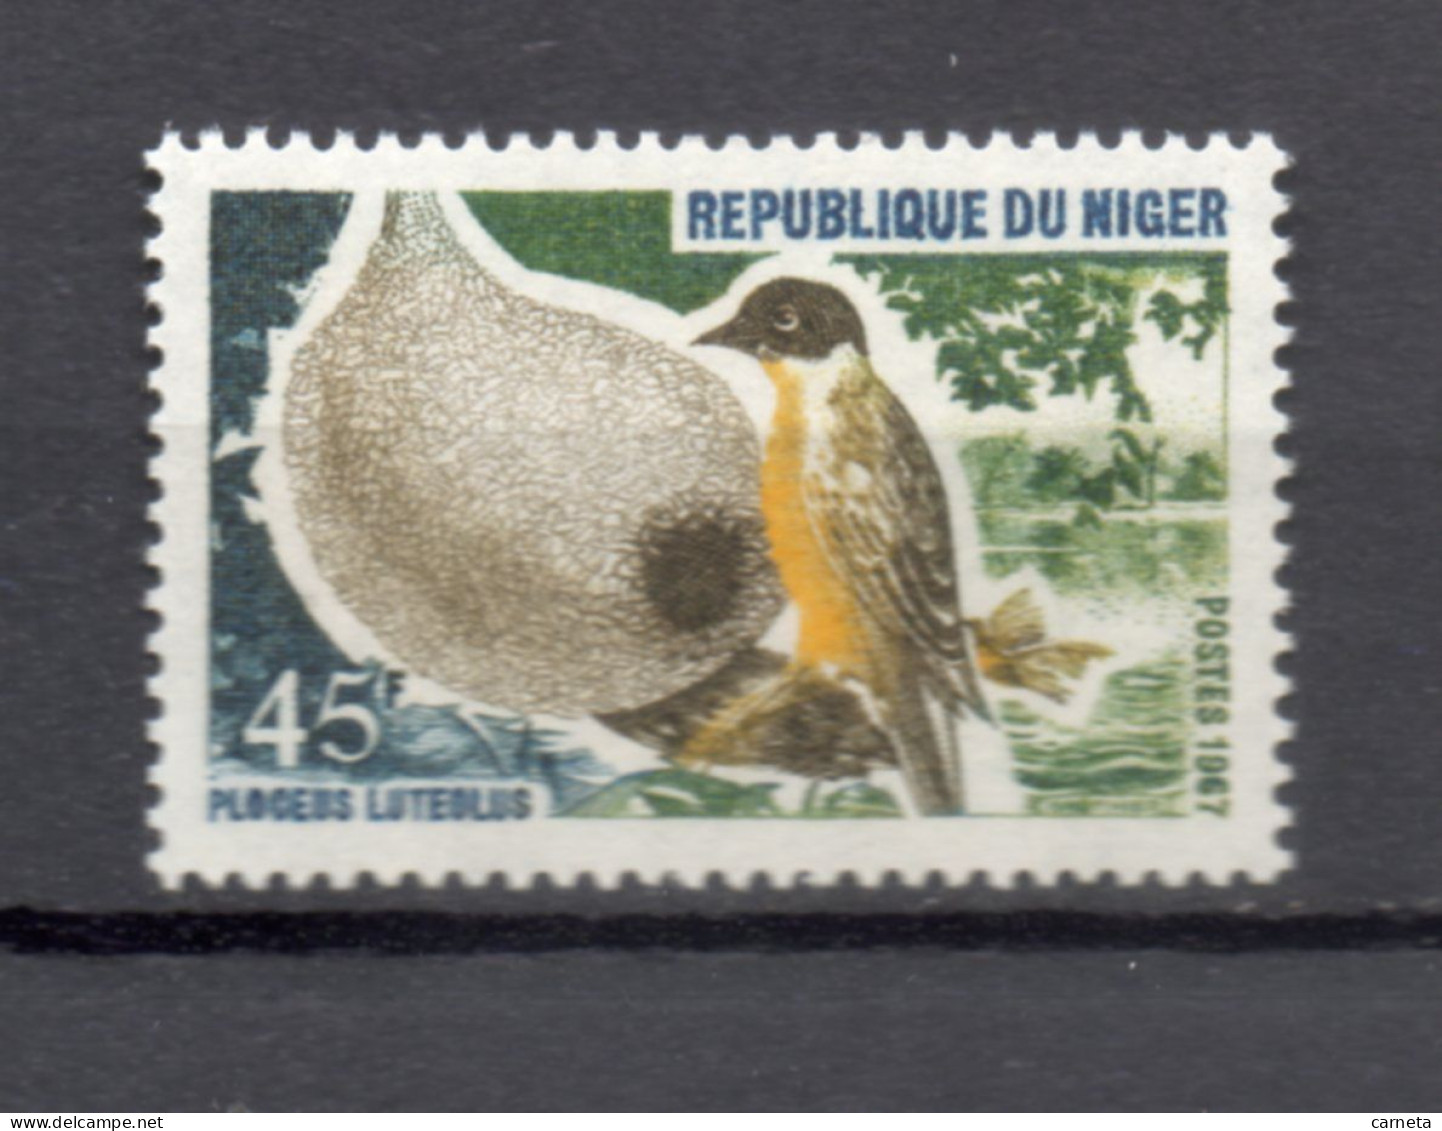 NIGER   N° 213    NEUF SANS CHARNIERE  COTE 2.50€    OISEAUX ANIMAUX FAUNE - Niger (1960-...)